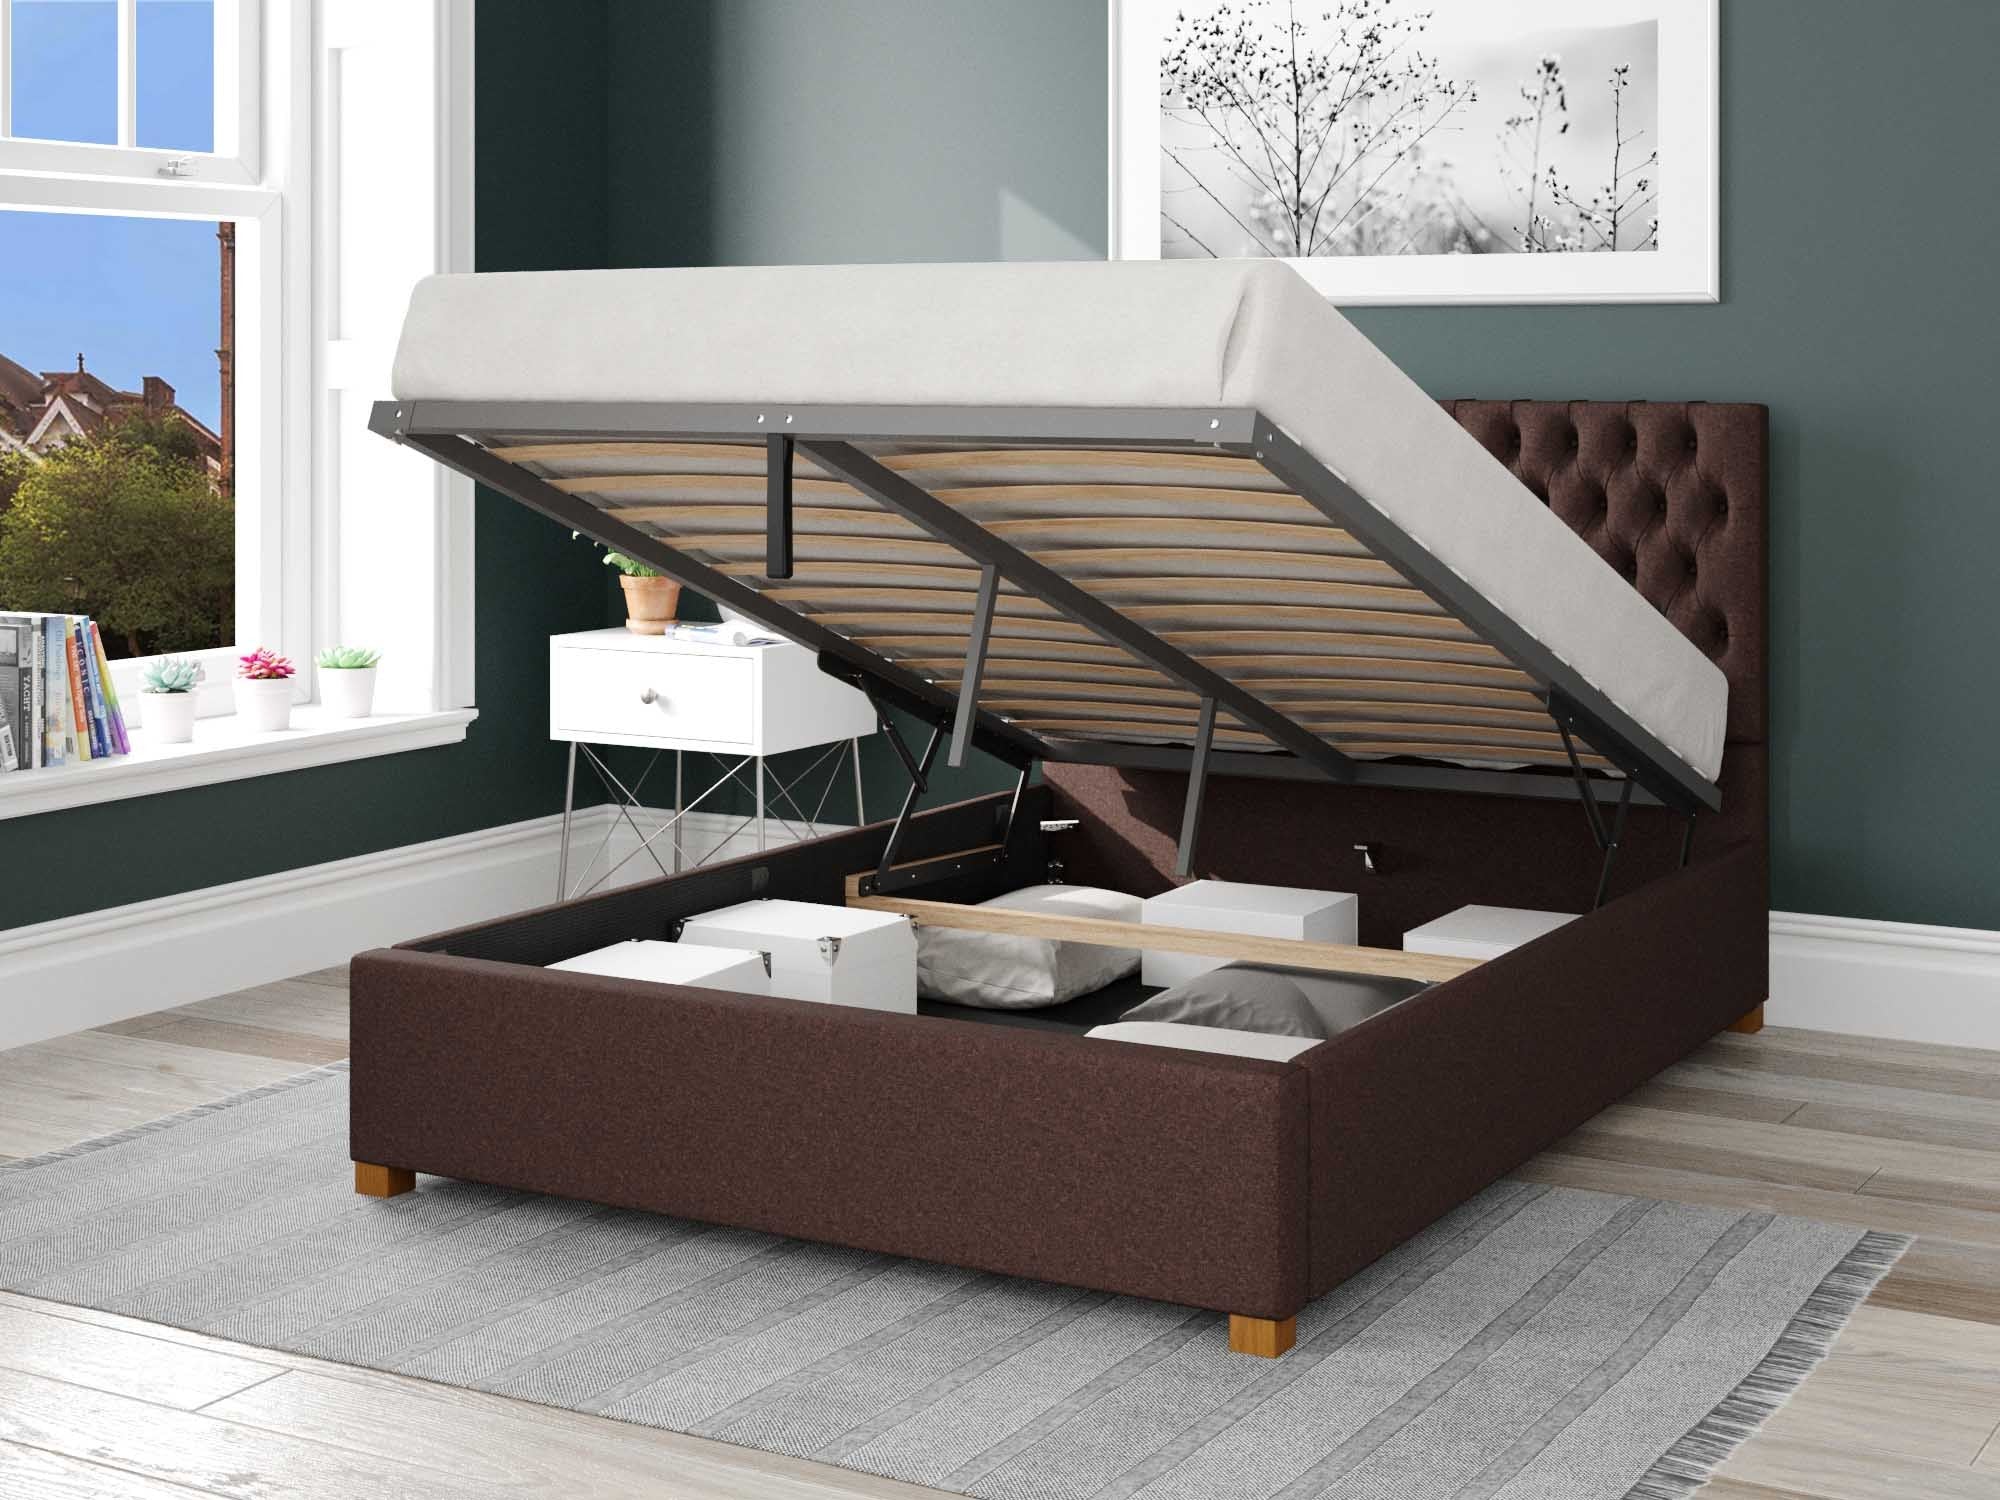 Monroe Upholstered Ottoman Bed - Yorkshire Knit - Chocolate